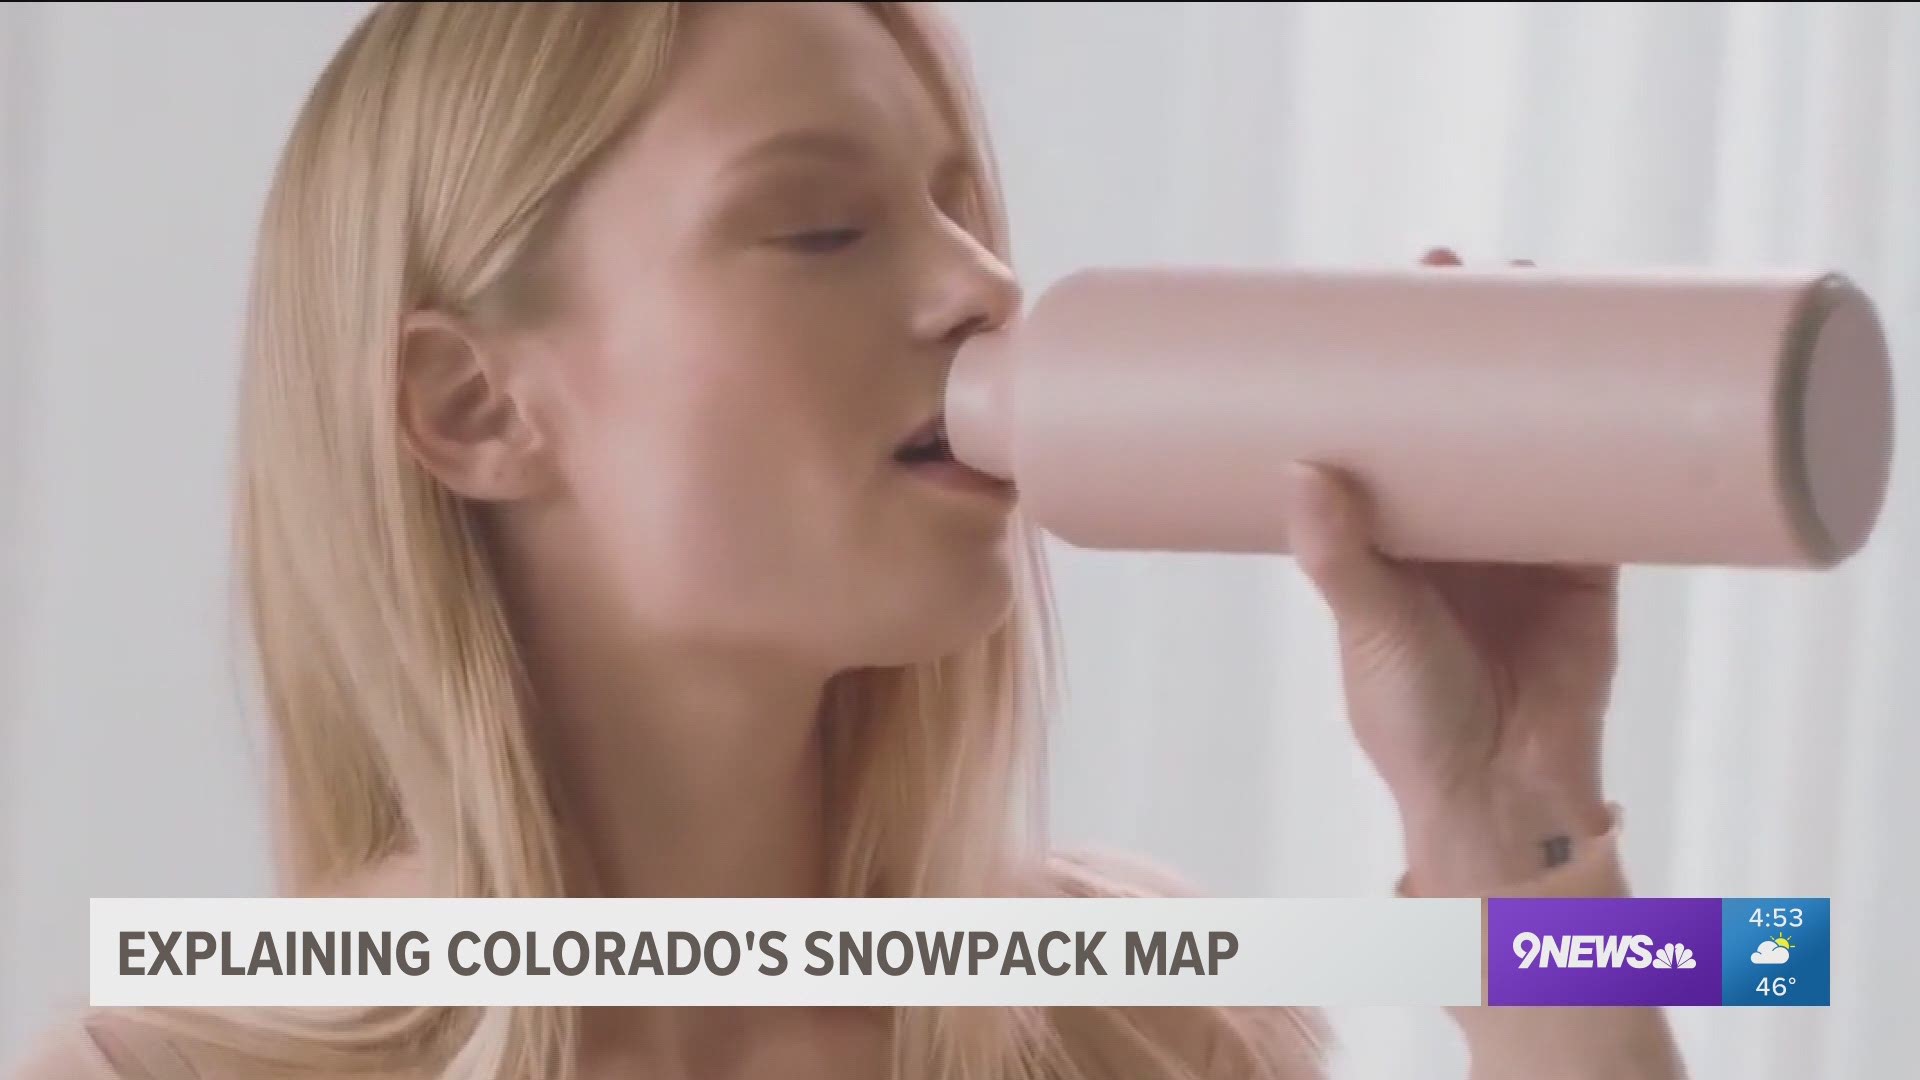 Snowpack is simply the snow that accumulates on the ground from October to June.